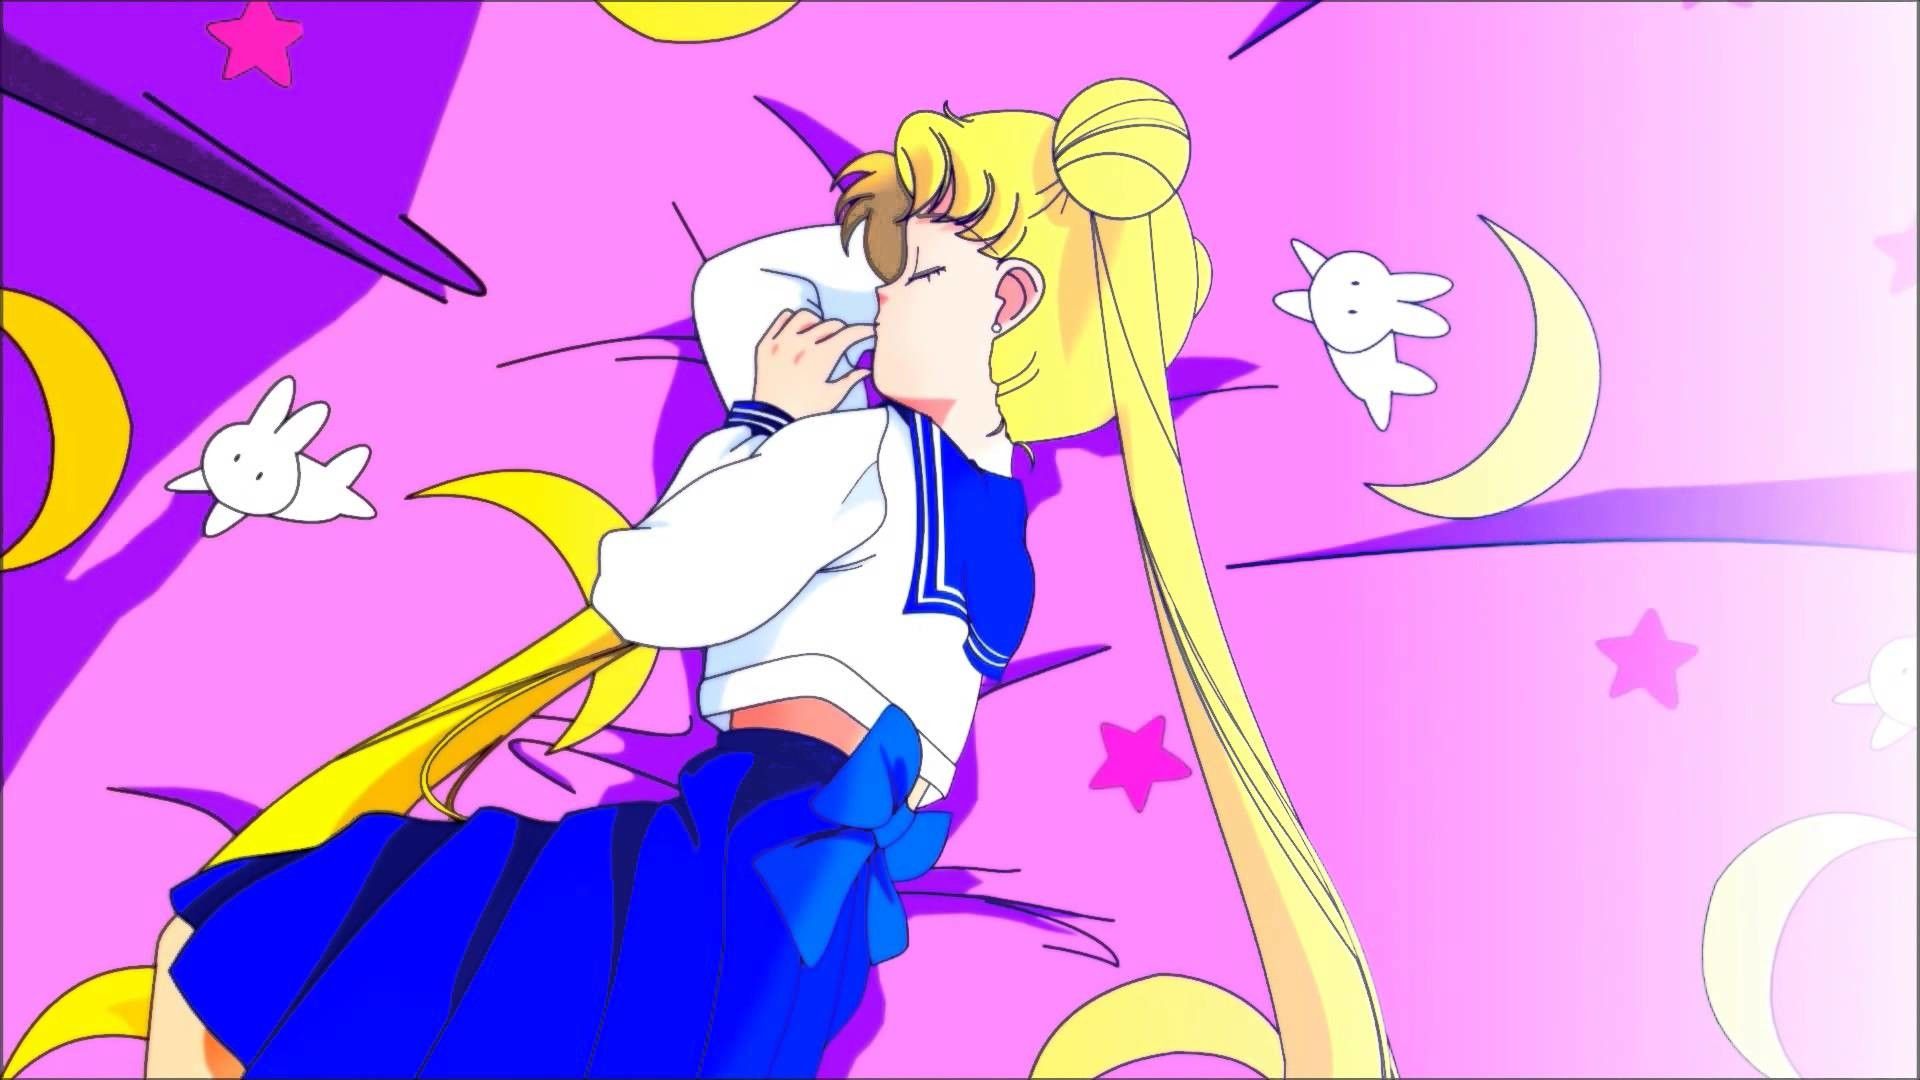 Aesthetic Sailor Moon Hd Wallpapers